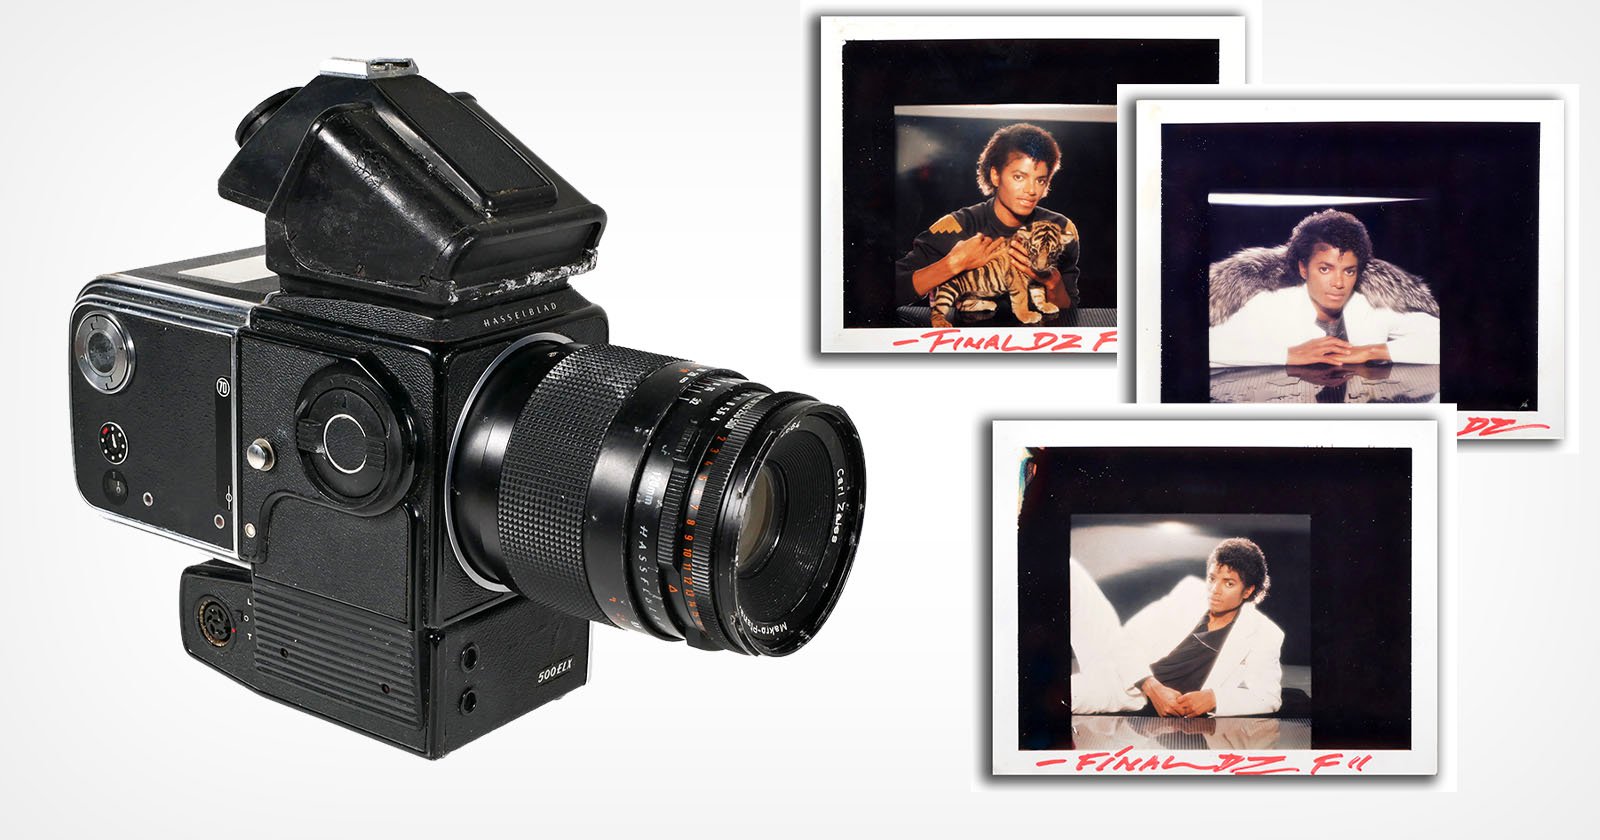 Michael Jackson Thriller Polaroid Test Shots and Camera Are Up for Sale